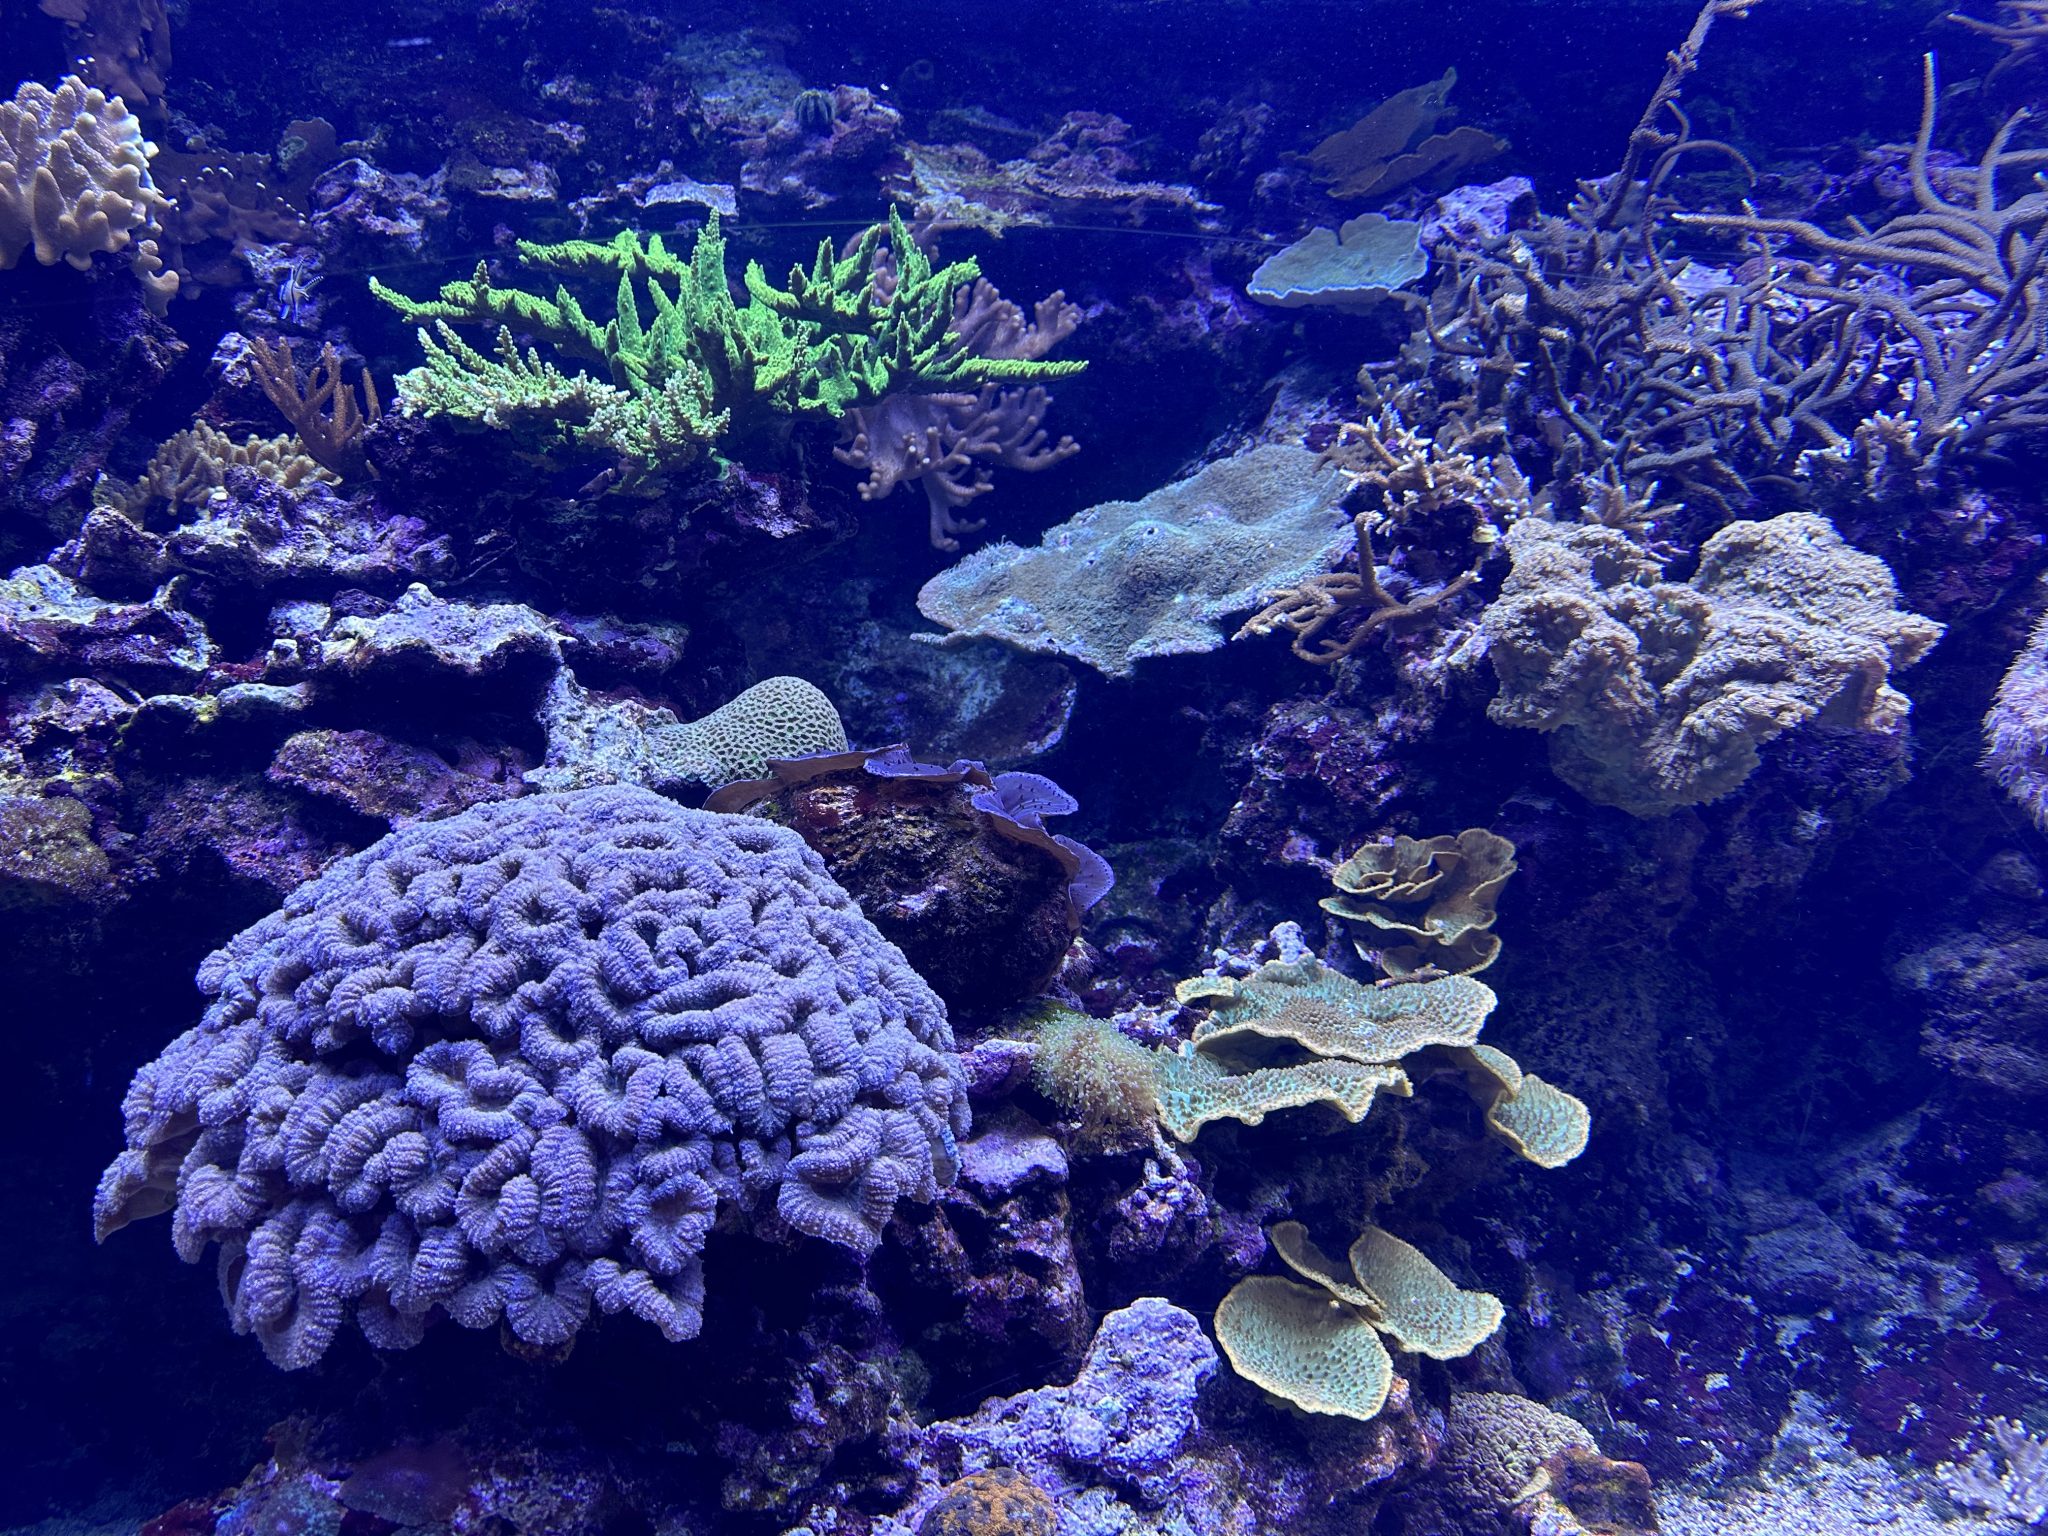 Coral in the aquarium of Burgers' Zoo in Arnhem, The Netherlands